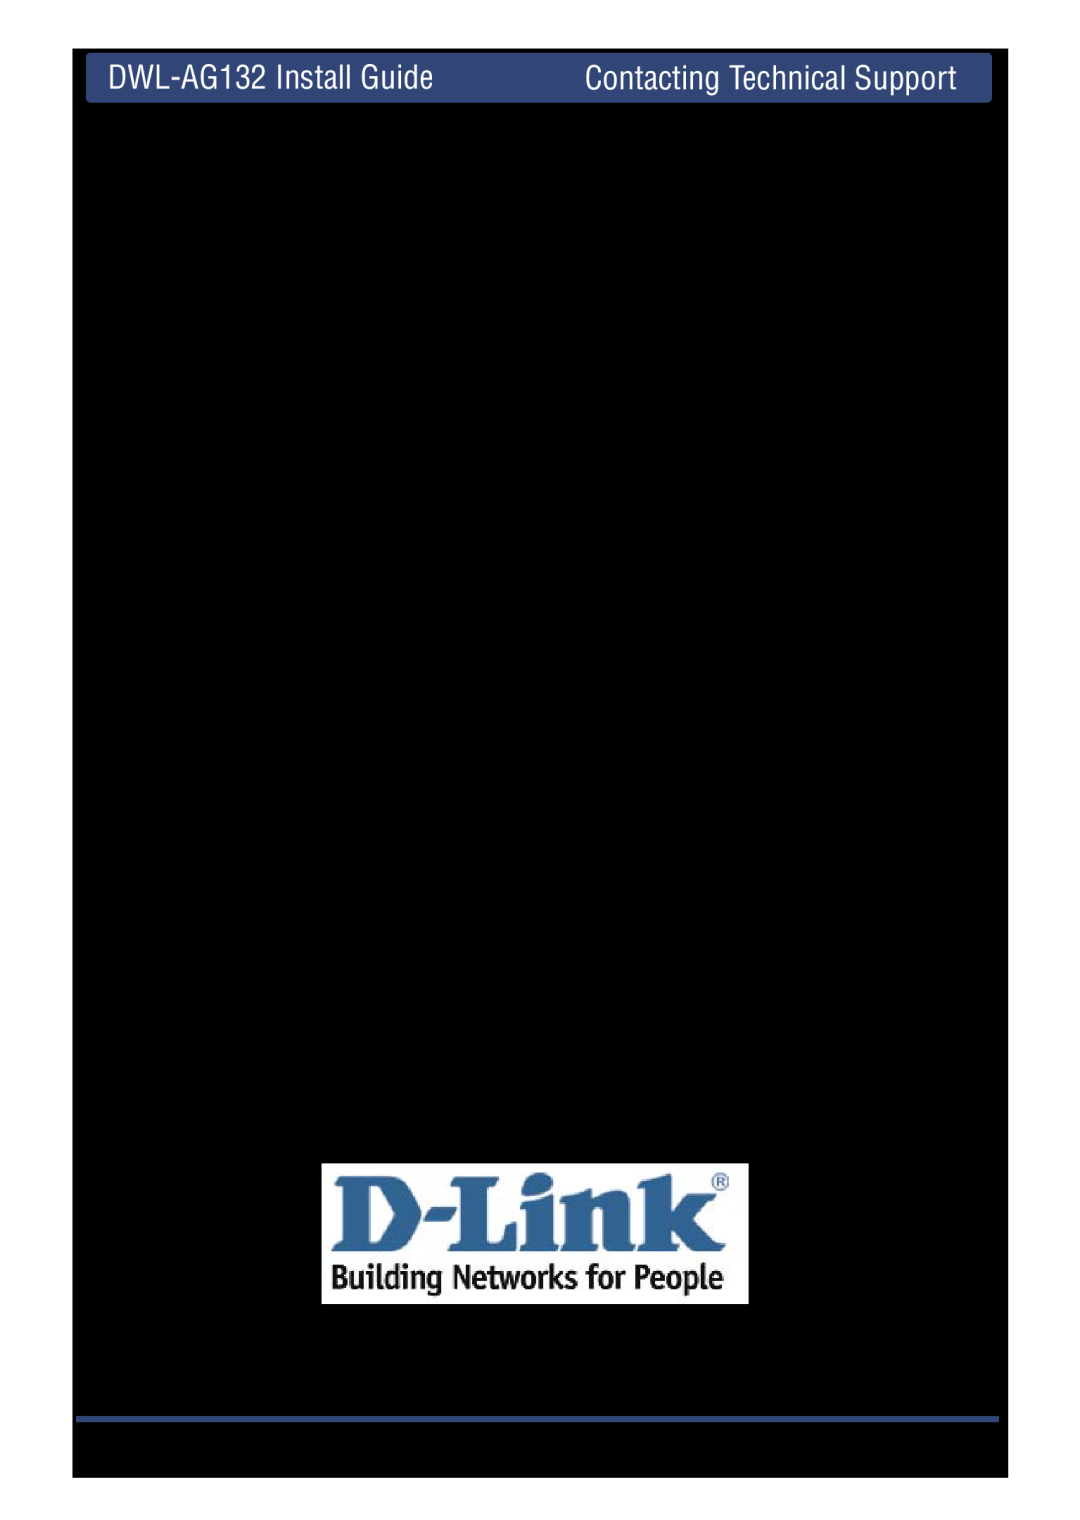 D-Link DWLAG700AP manual DWL-AG132 Install Guide Contacting Technical Support, D-Link Systems, Inc 